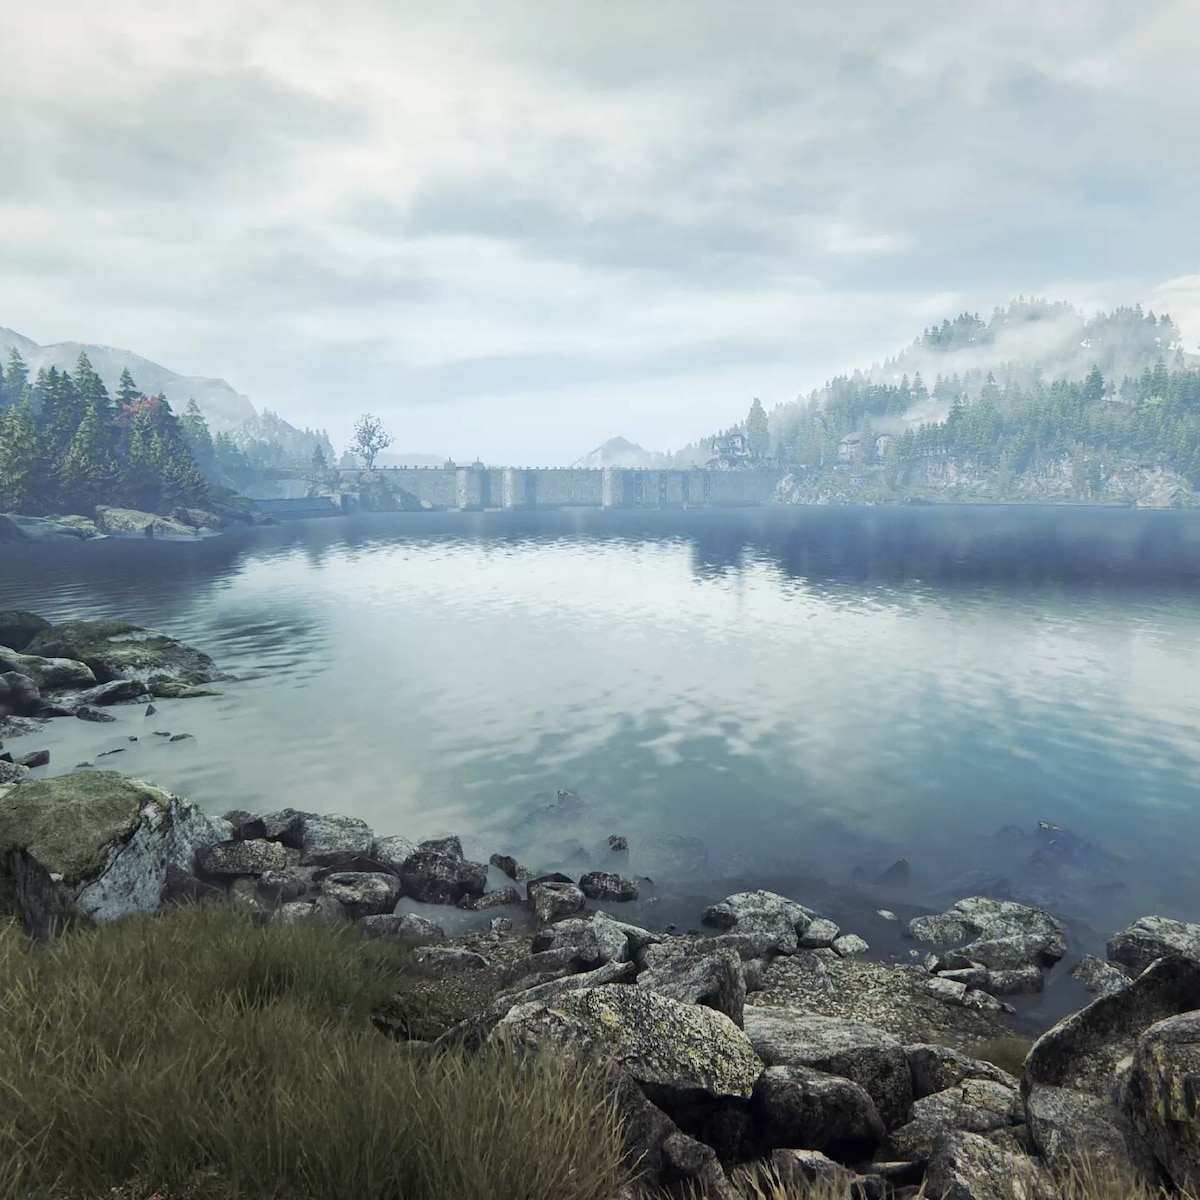 Ethan Carter Peaceful Lakeside view looped 21:9 3440x1440 60fps